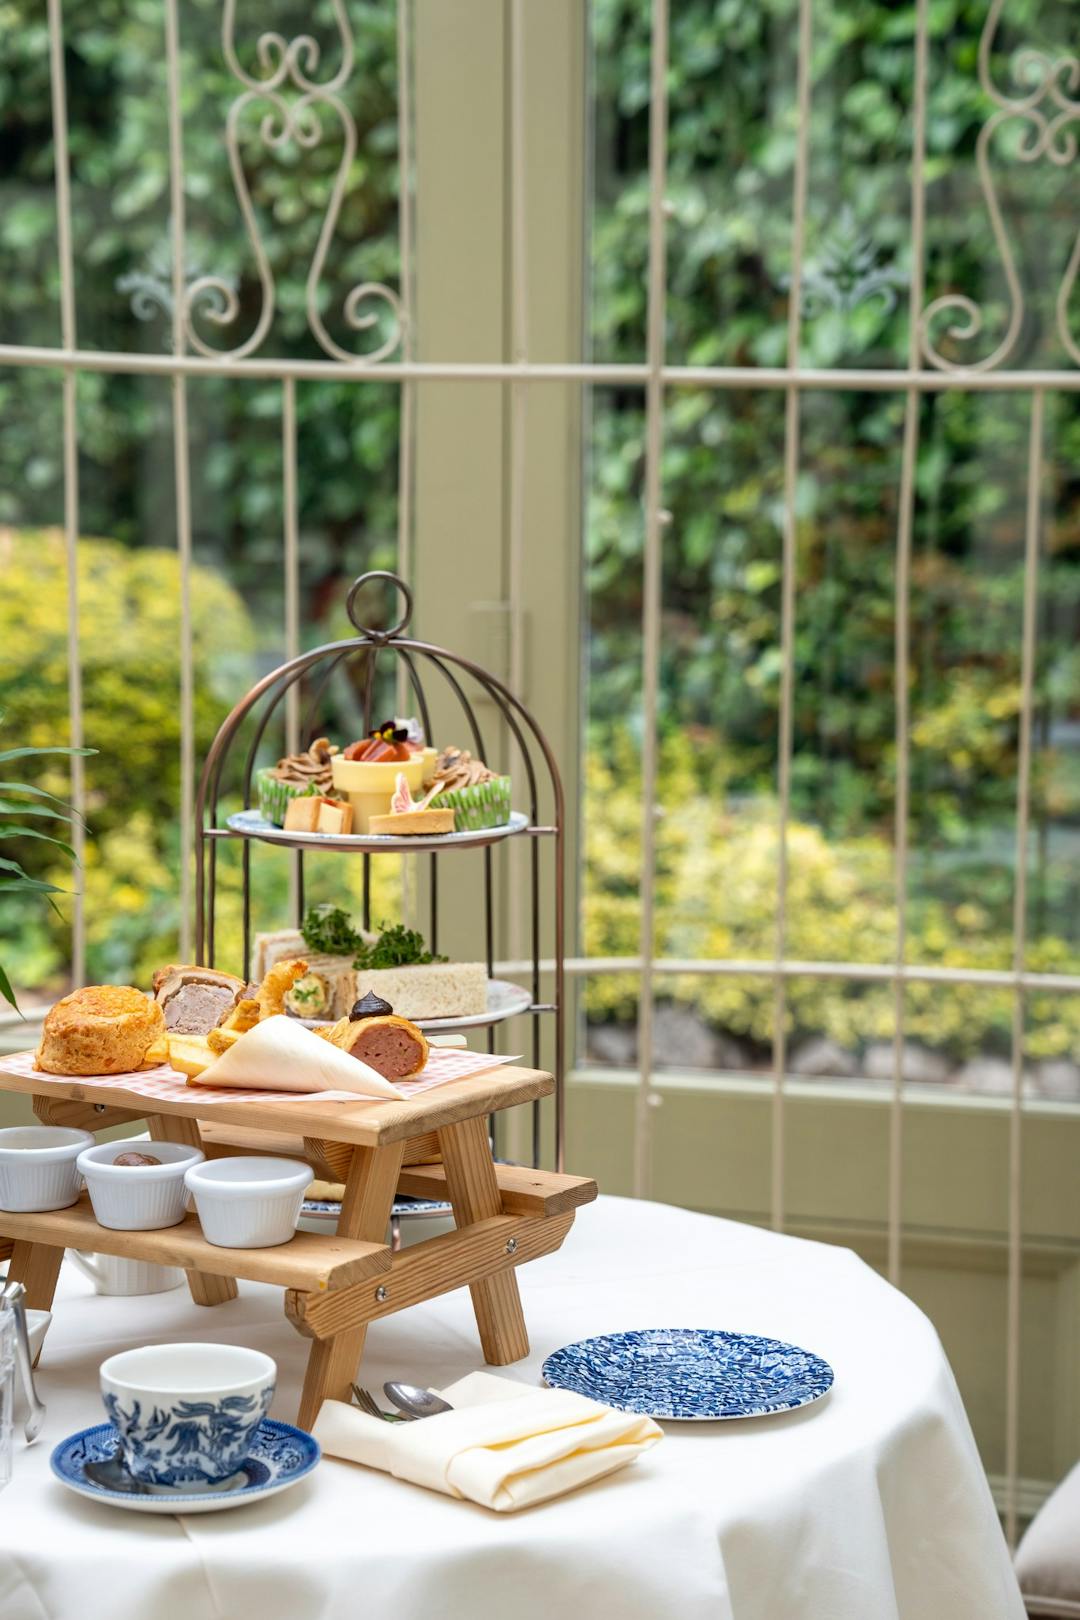 Afternoon Tea | Coombe Abbey  - image 1